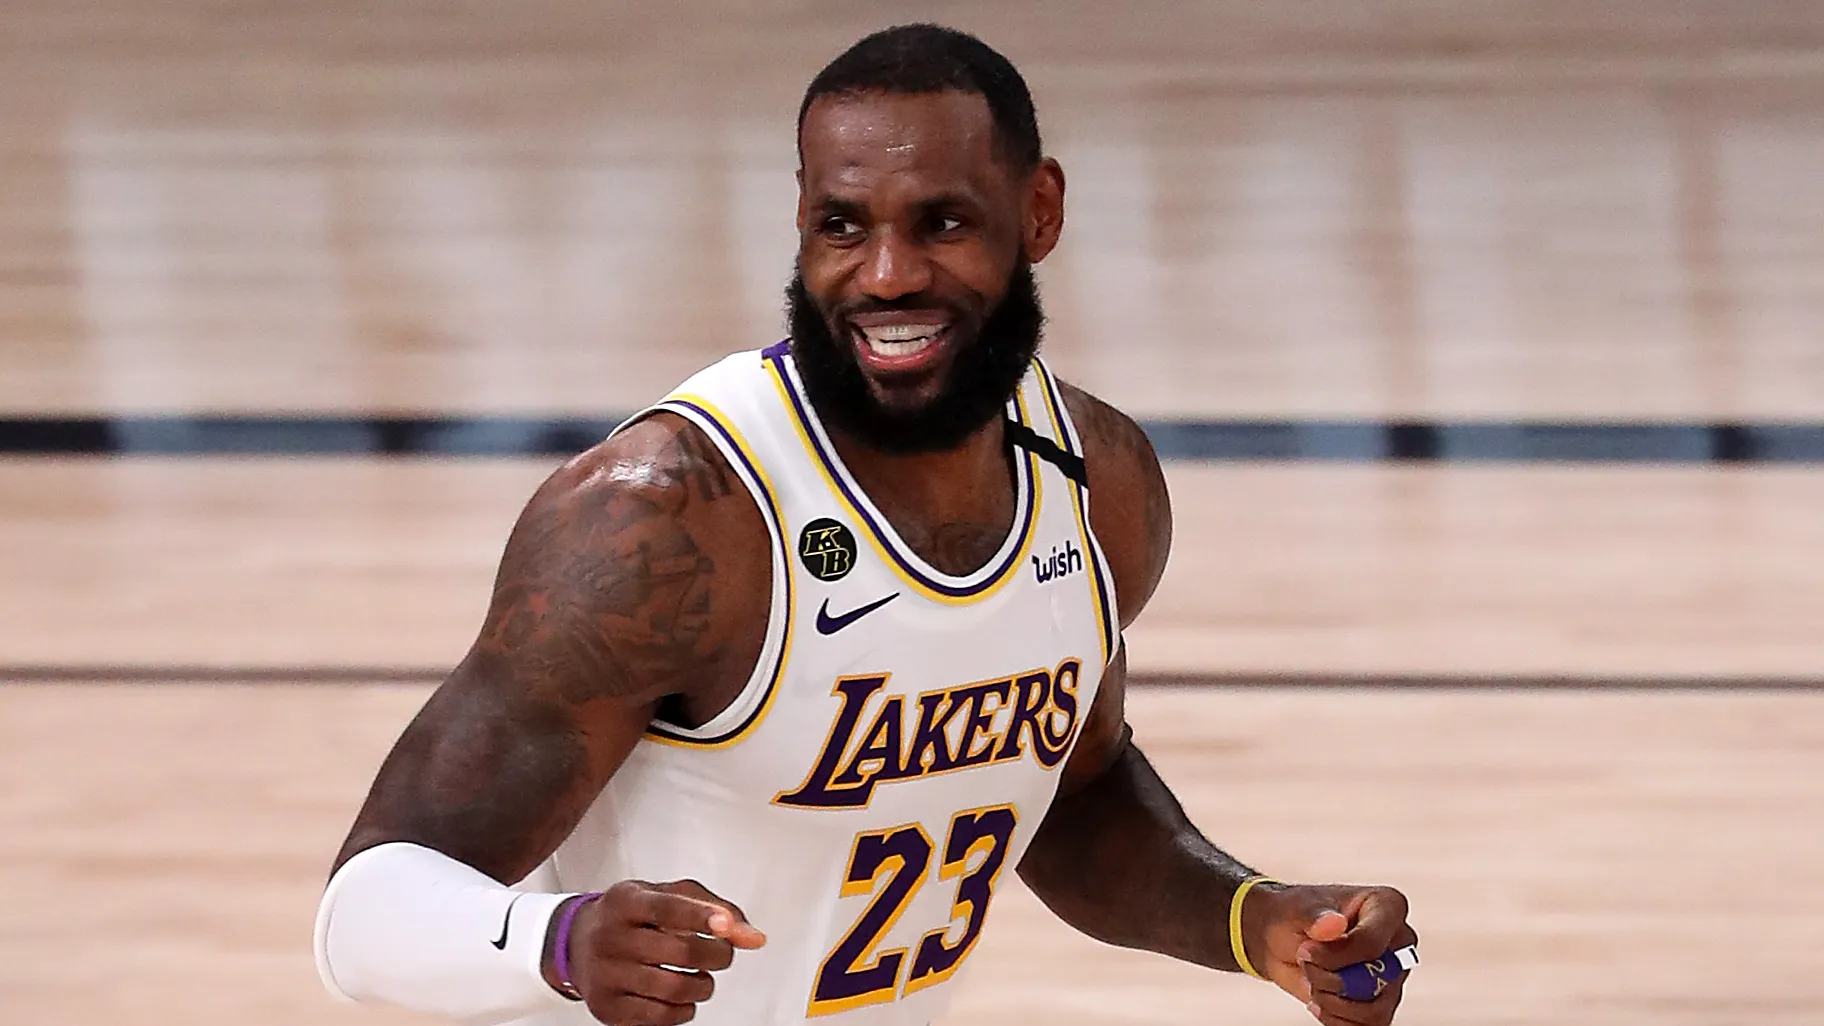 Lakers' LeBron James Discusses Knee Injury and Team's Struggles